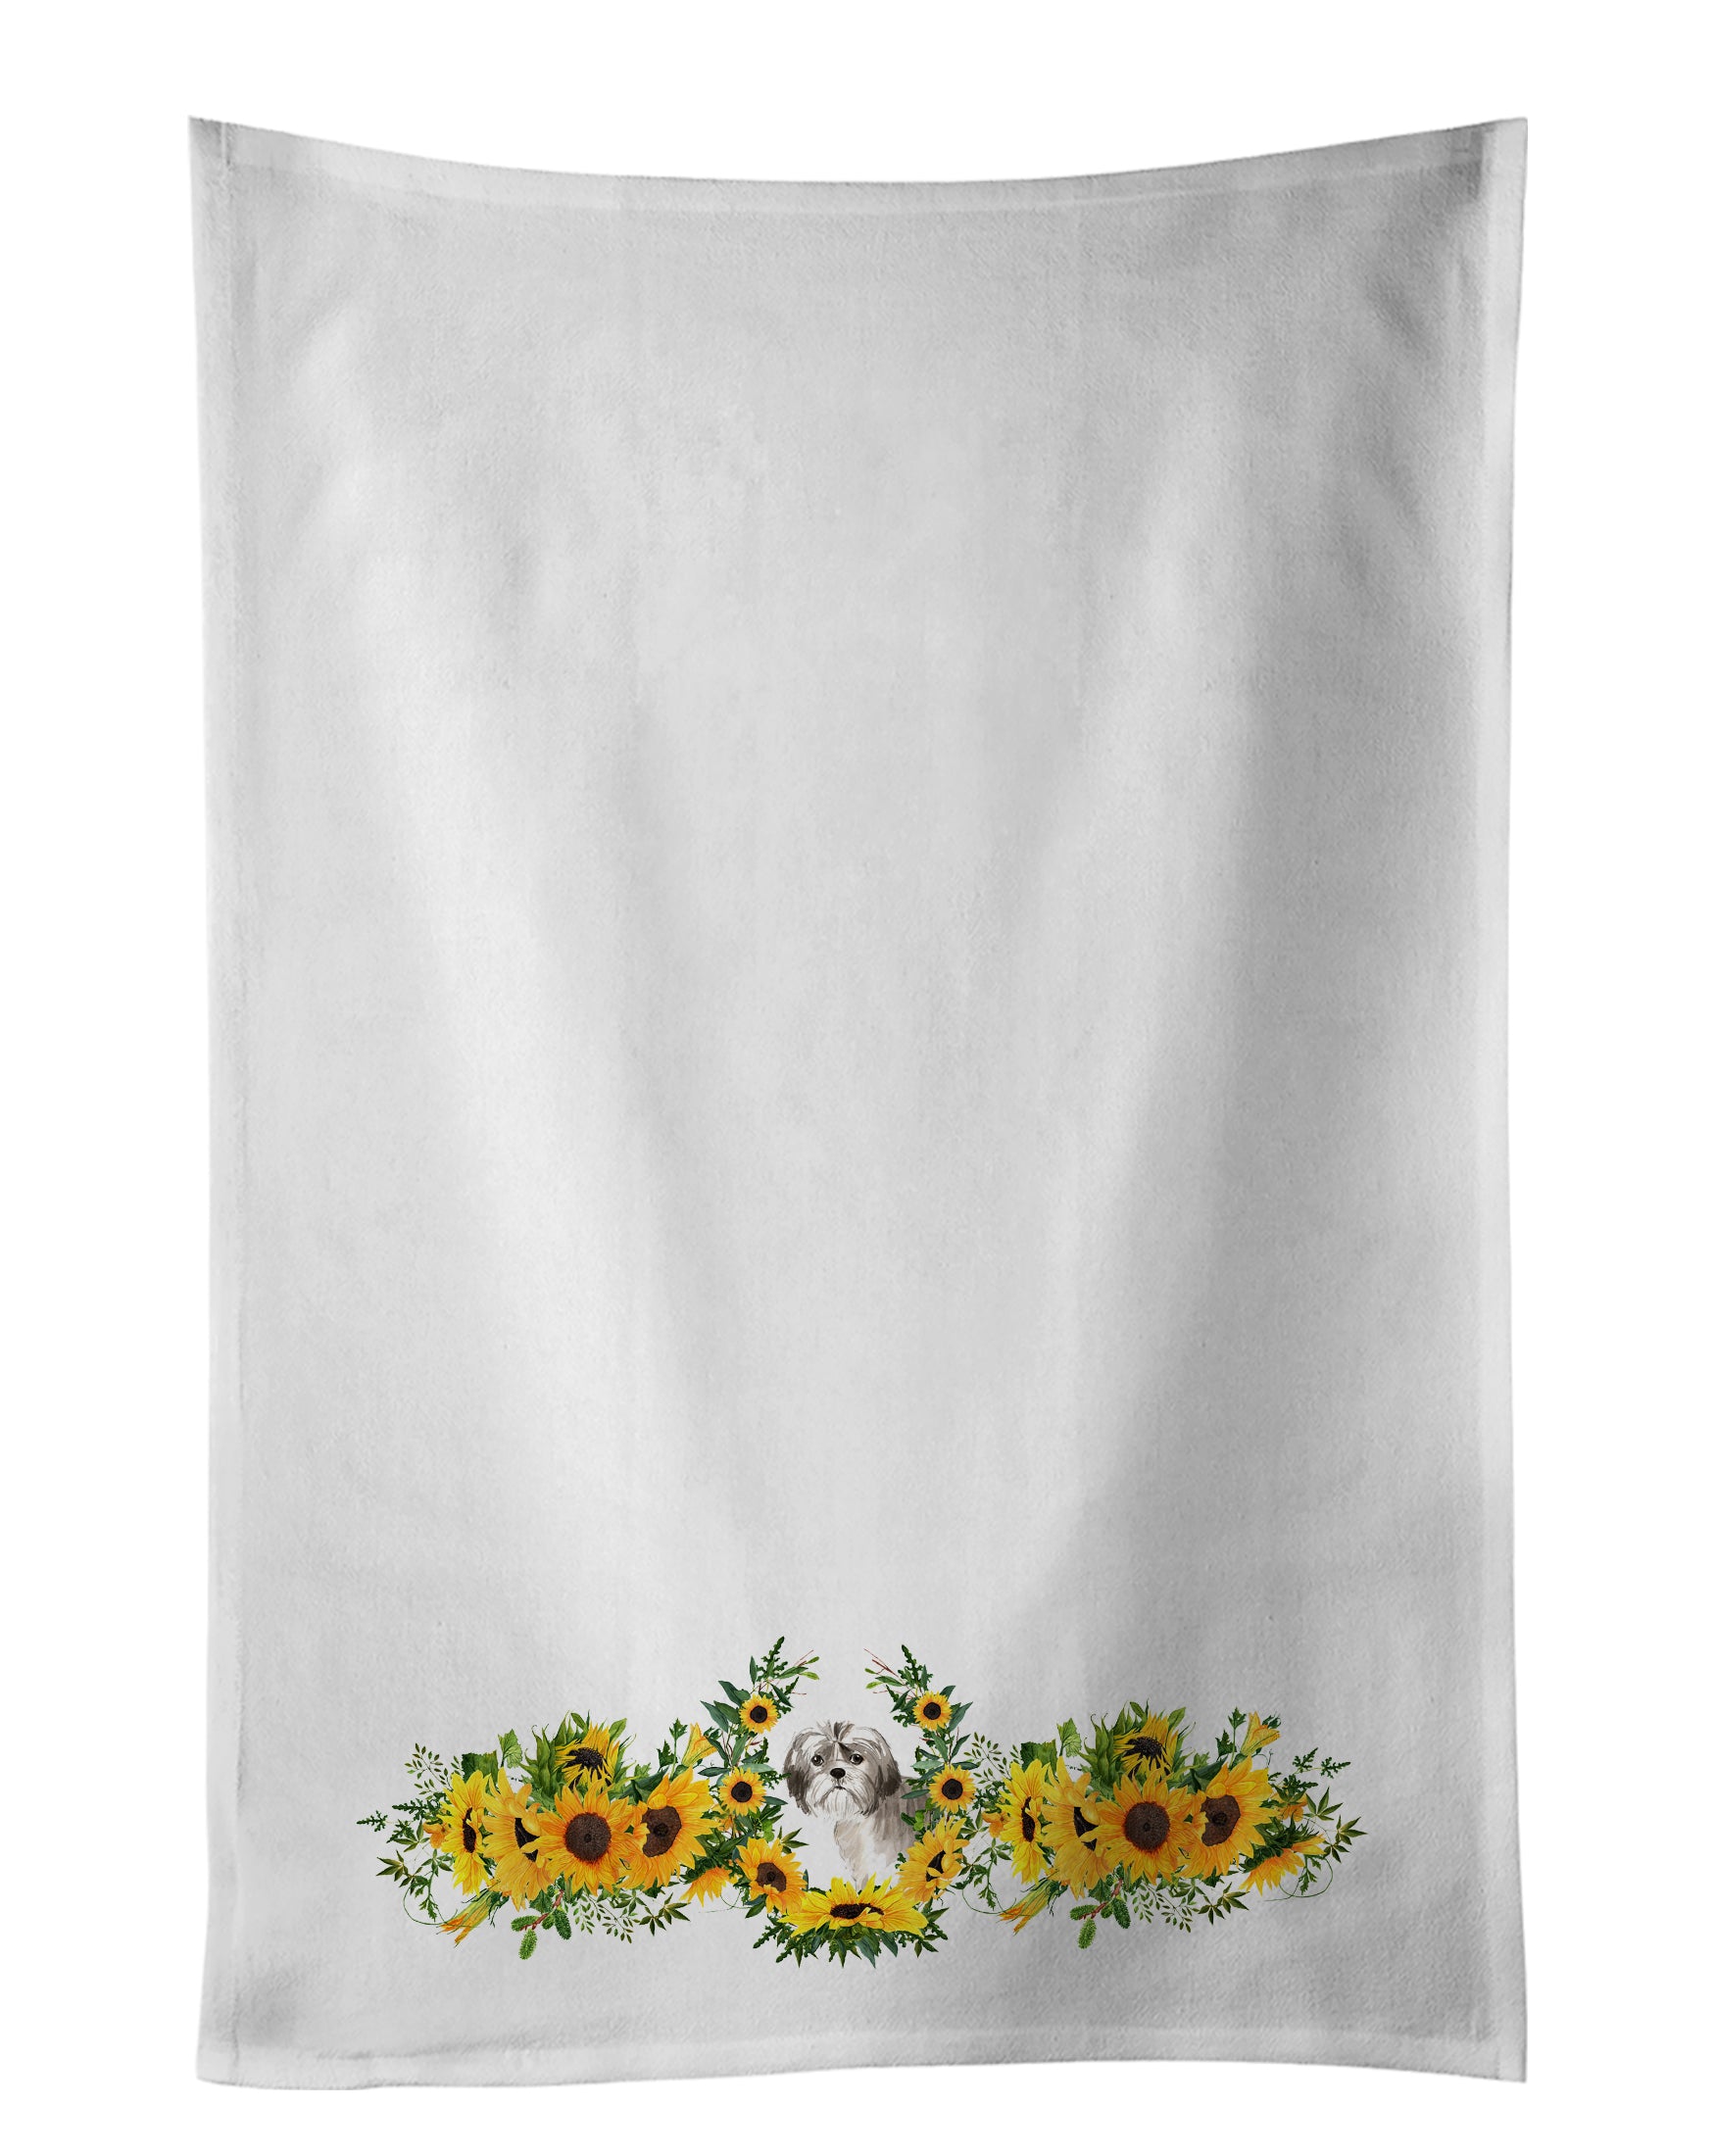 Buy this Shih Tzu Puppy in Sunflowers White Kitchen Towel Set of 2